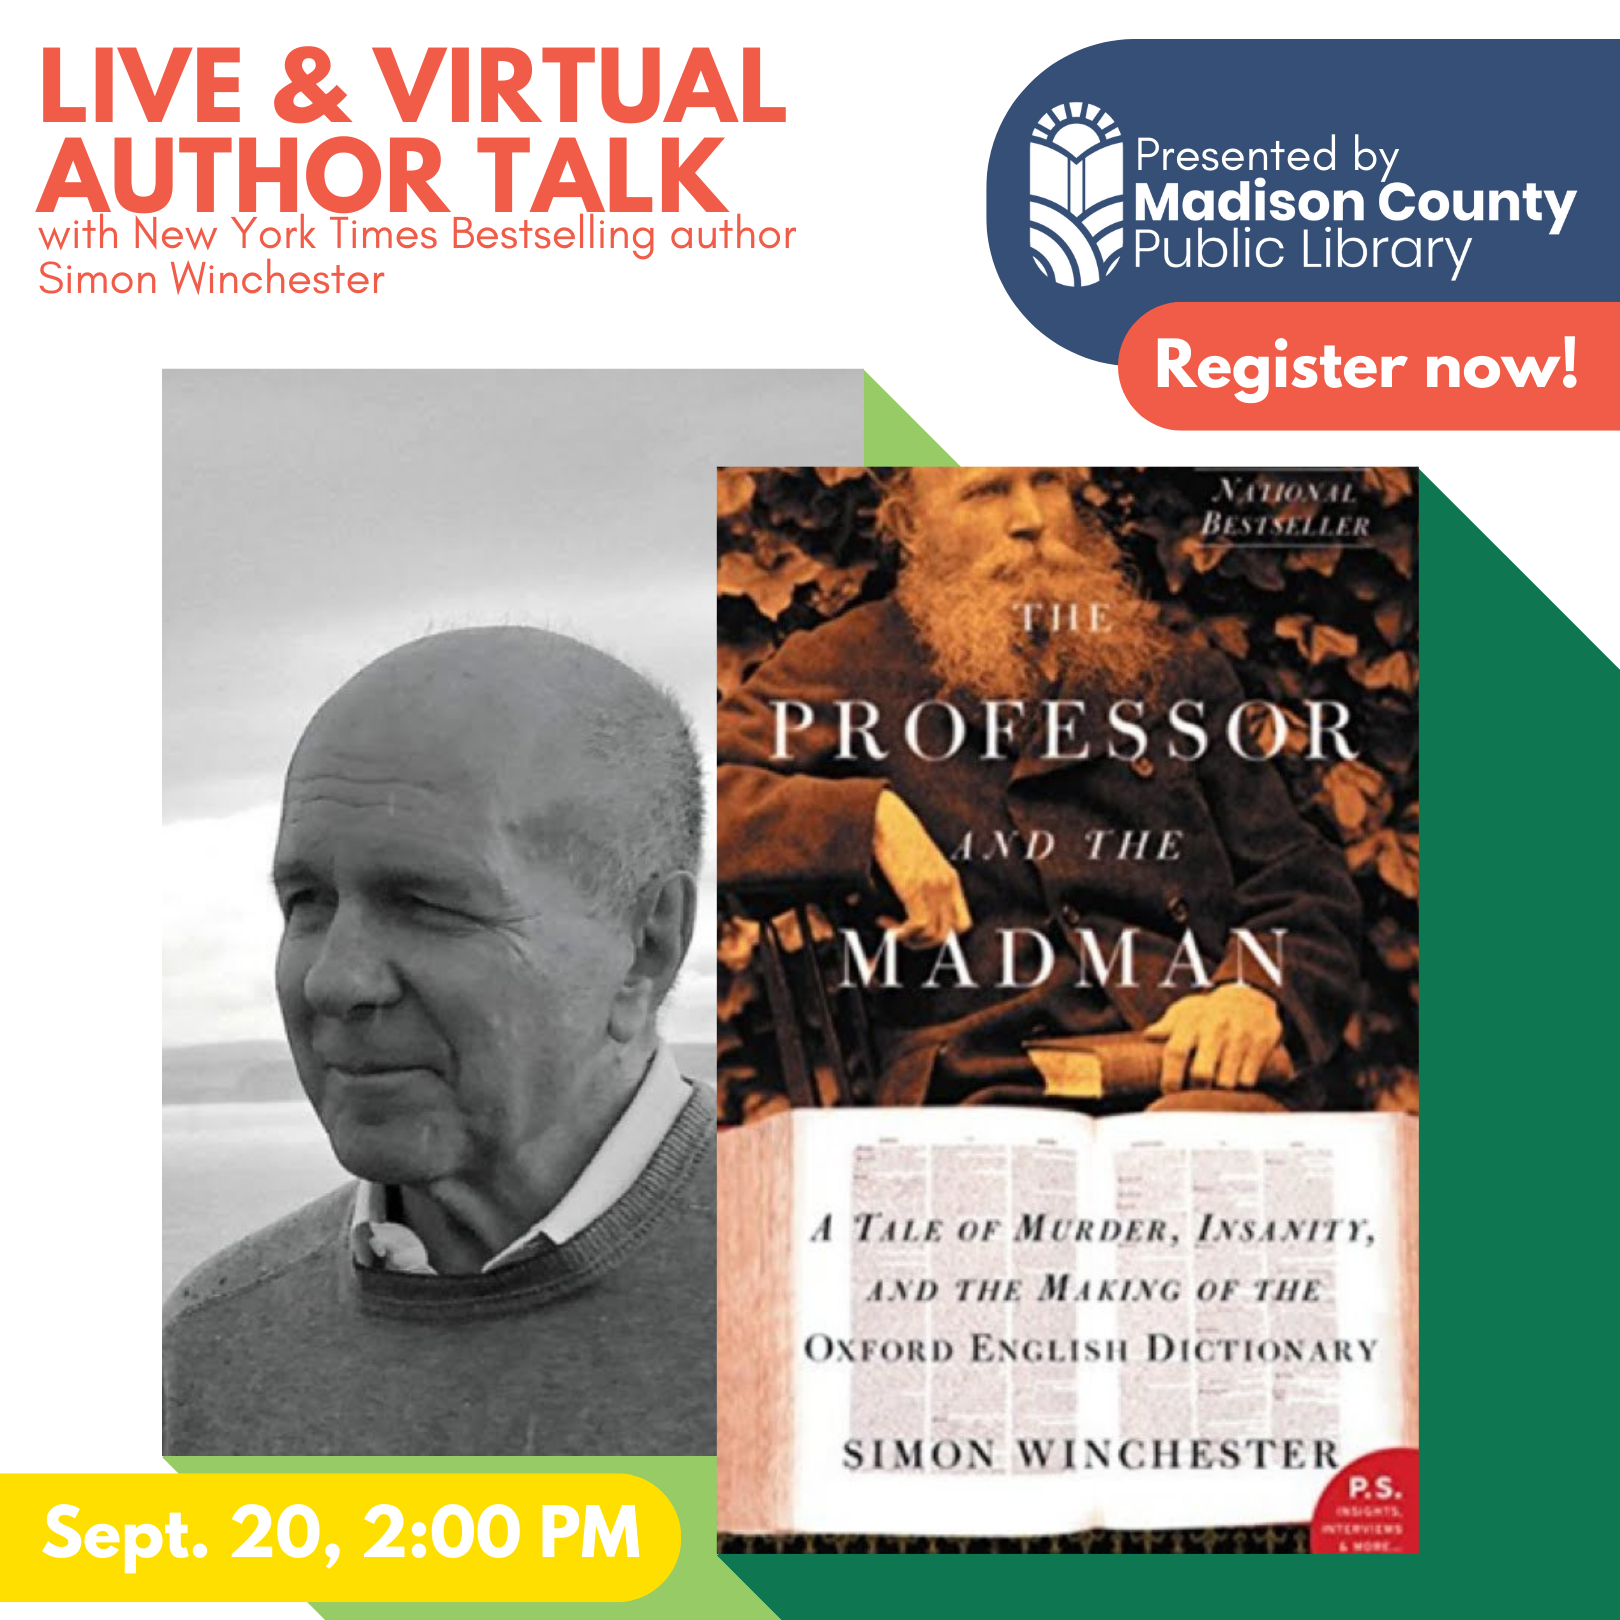 Live and virtual author talk with Simon Winchester